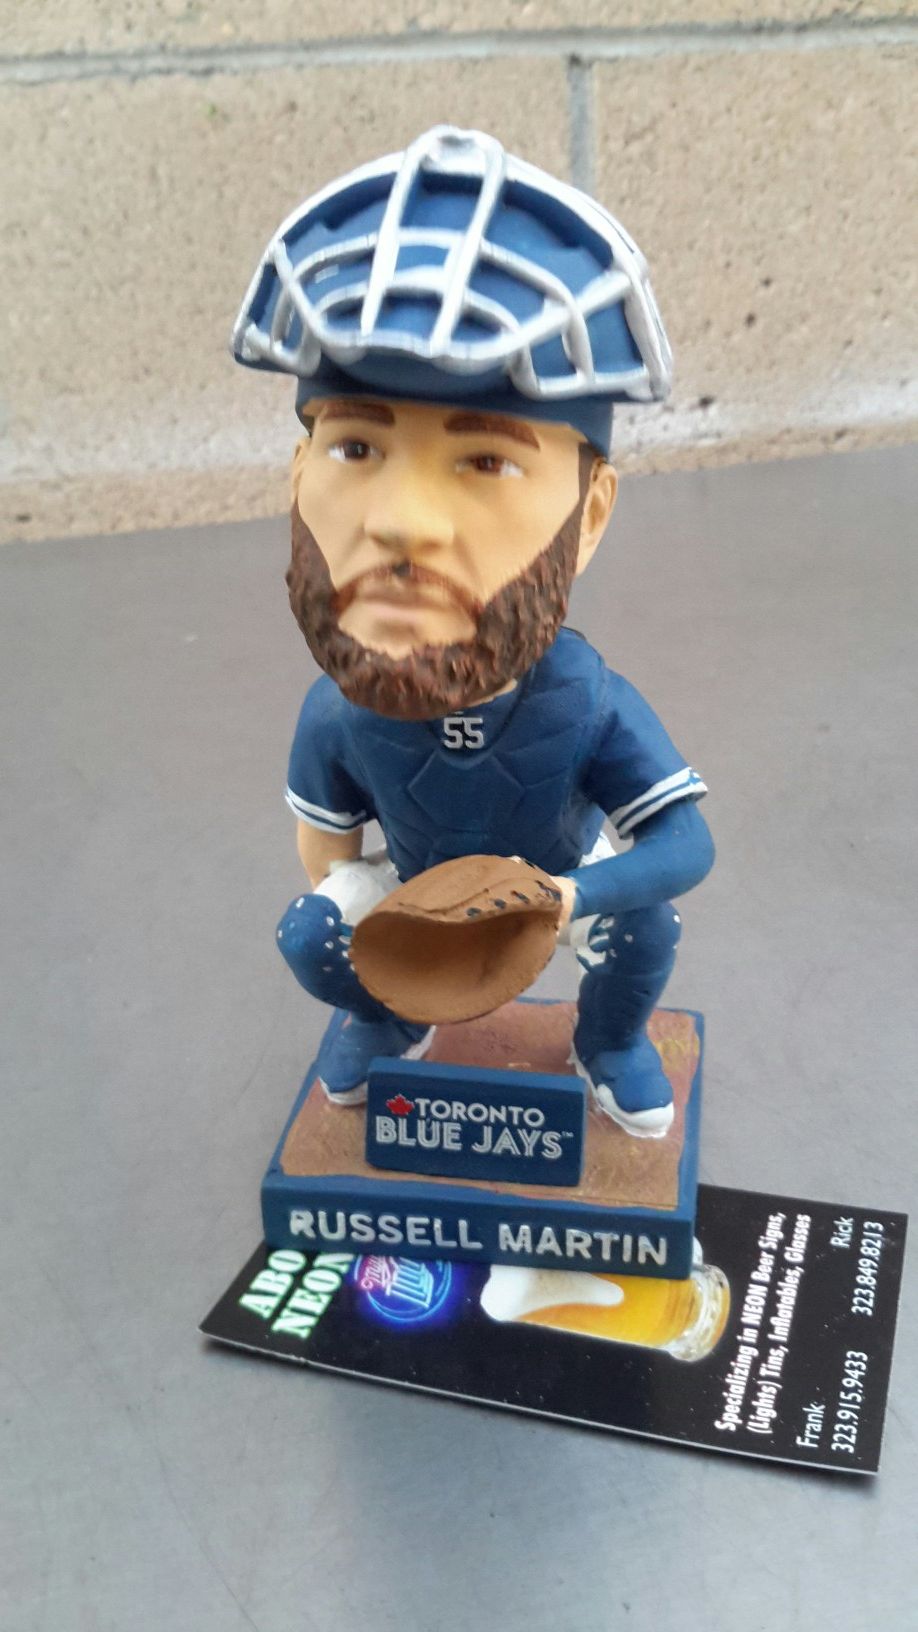 TORONTO BLUE JAYS RUSSELL MARTIN BOBBLEHEAD. ( ALSO PLENTY OF NEON SIGNS / LIGHTS AVAILABLE FOR SALE ). DODGERS BOBBLEHEADS AVAILABLE.